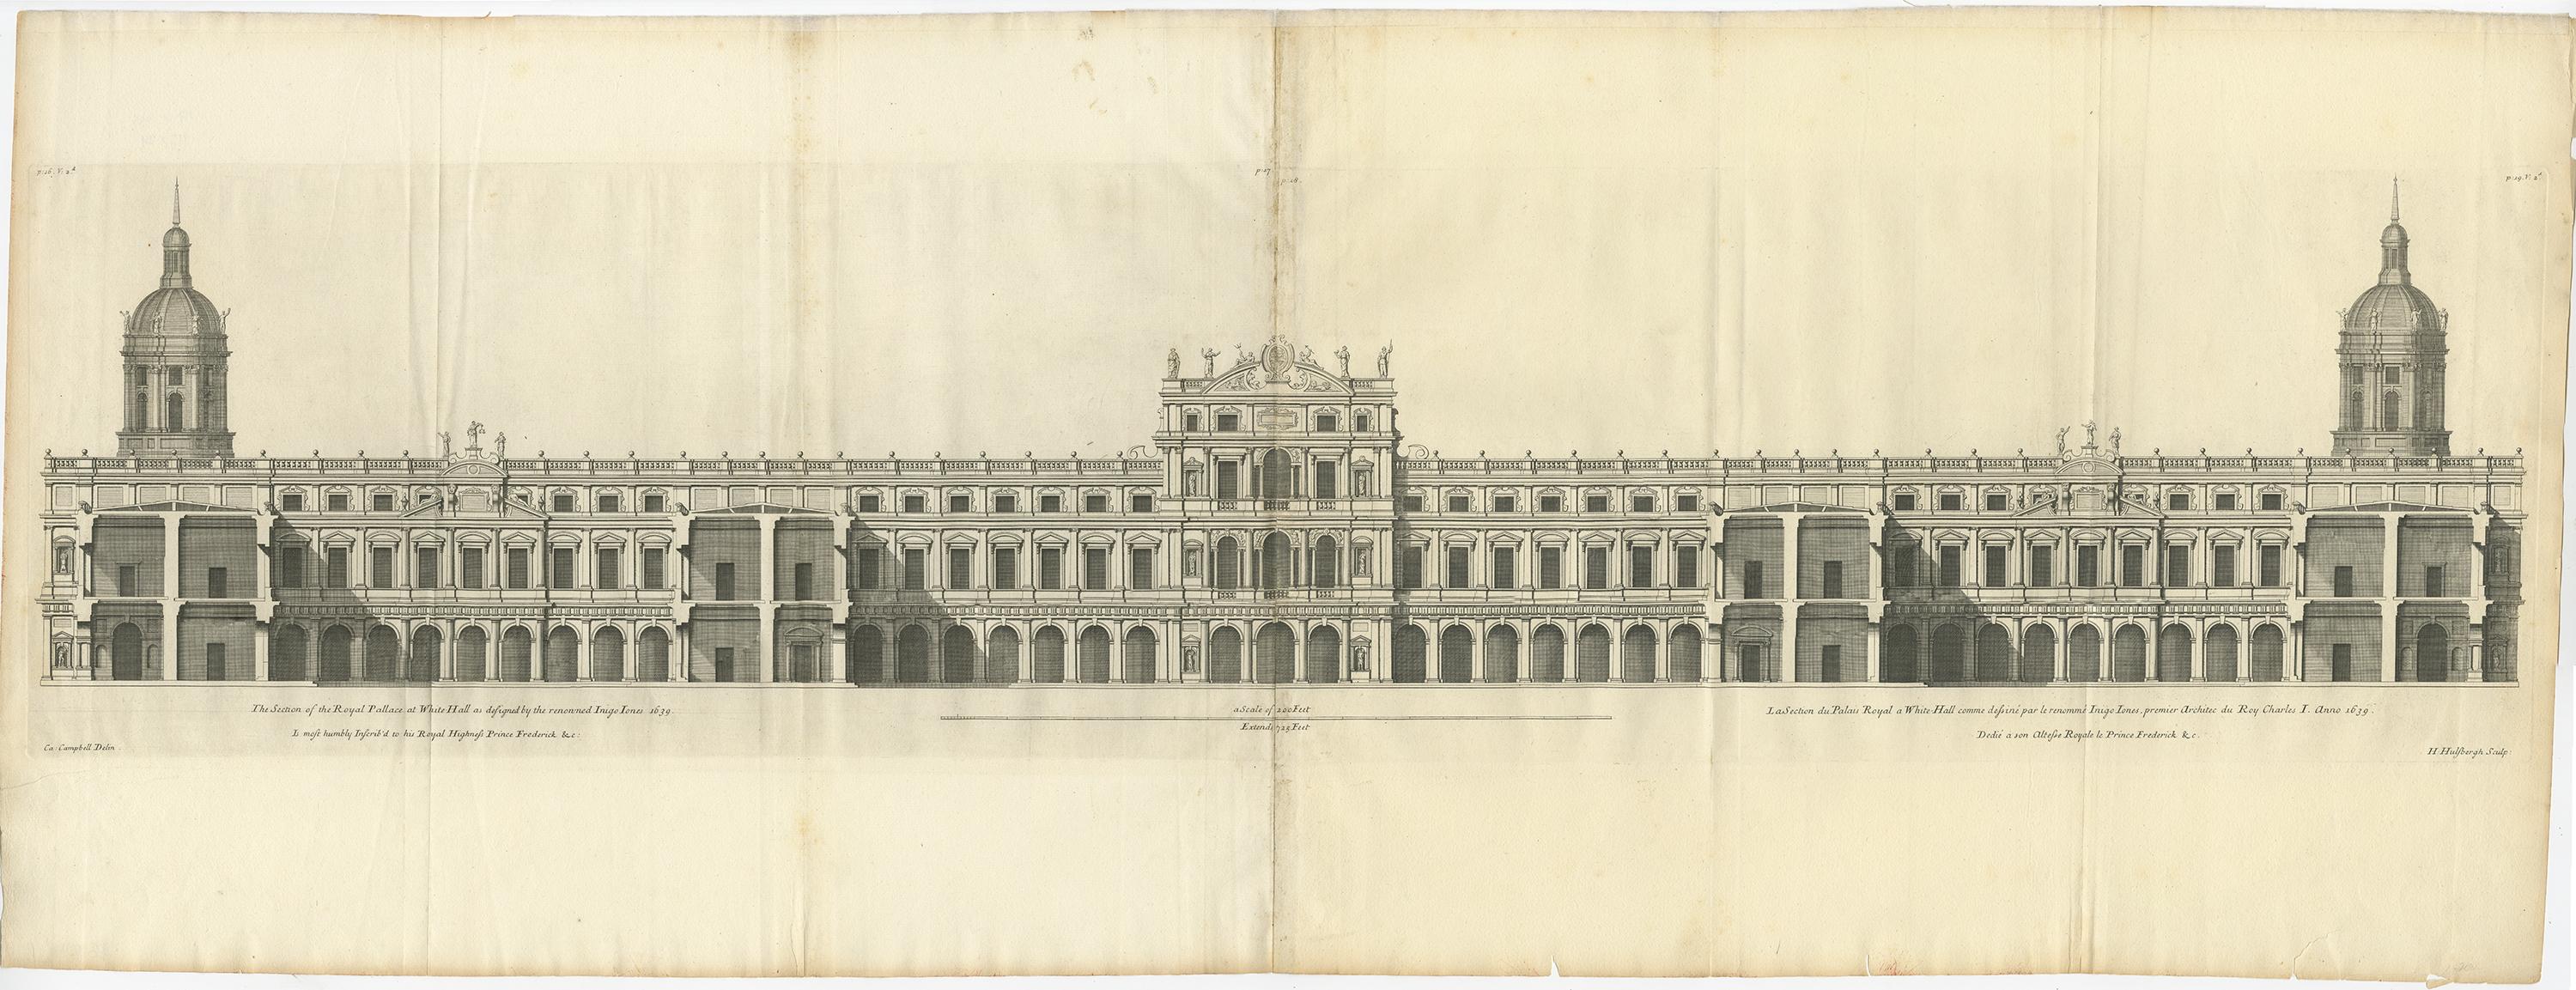 Set of two antique prints titled 'The Section of the Royal Pallace at White Hall (..)'. Original antique prints with designs for the Palace of Whitehall at Westminster, Middlesex. These prints originate from 'Vitruvius Britannicus' by Colen